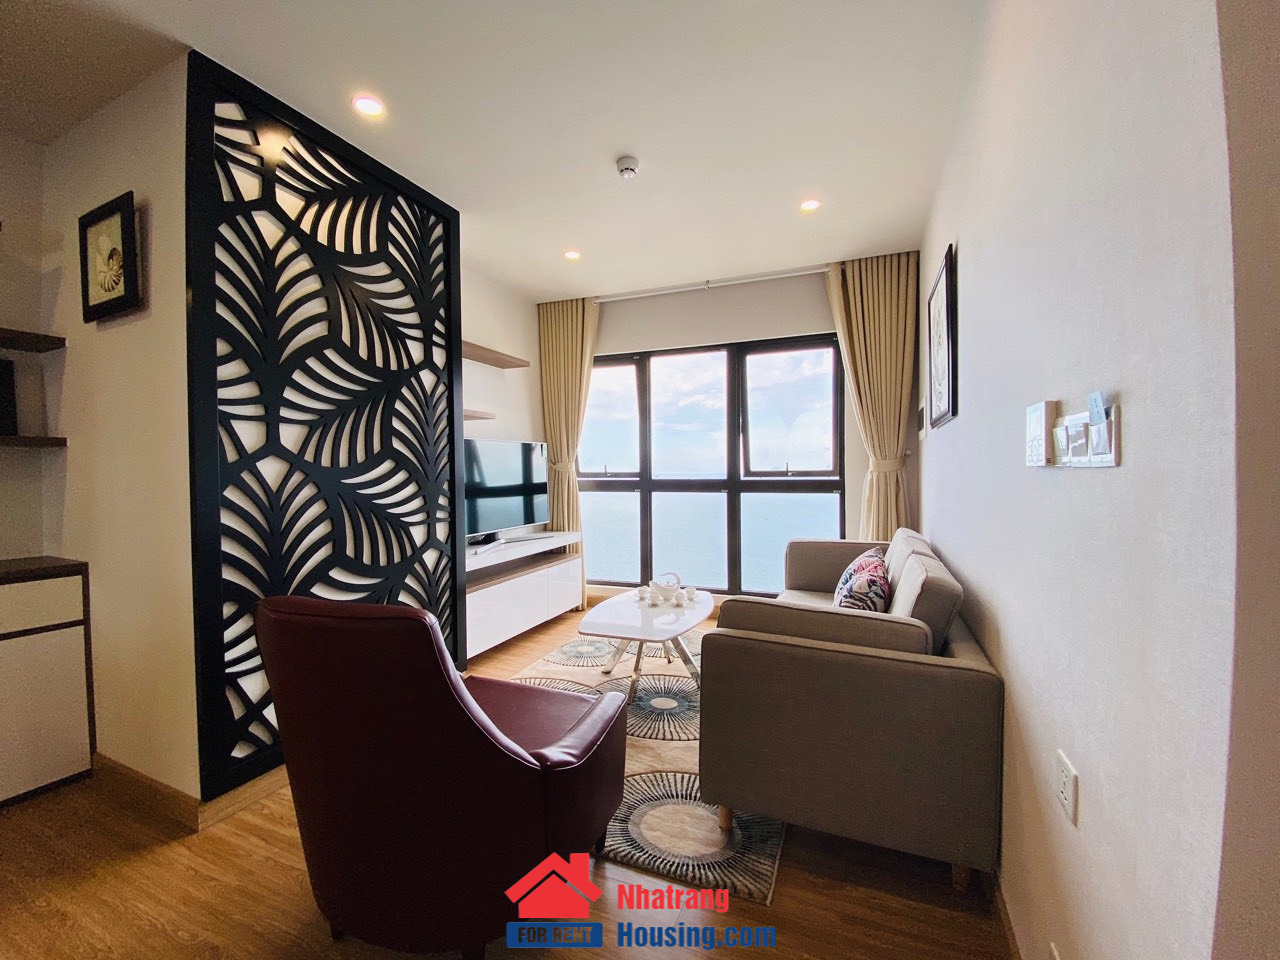 Gold Coast Nha Trang Apartment for rent | Two bedrooms | 70m2 | 1000$ (23 millionVND)